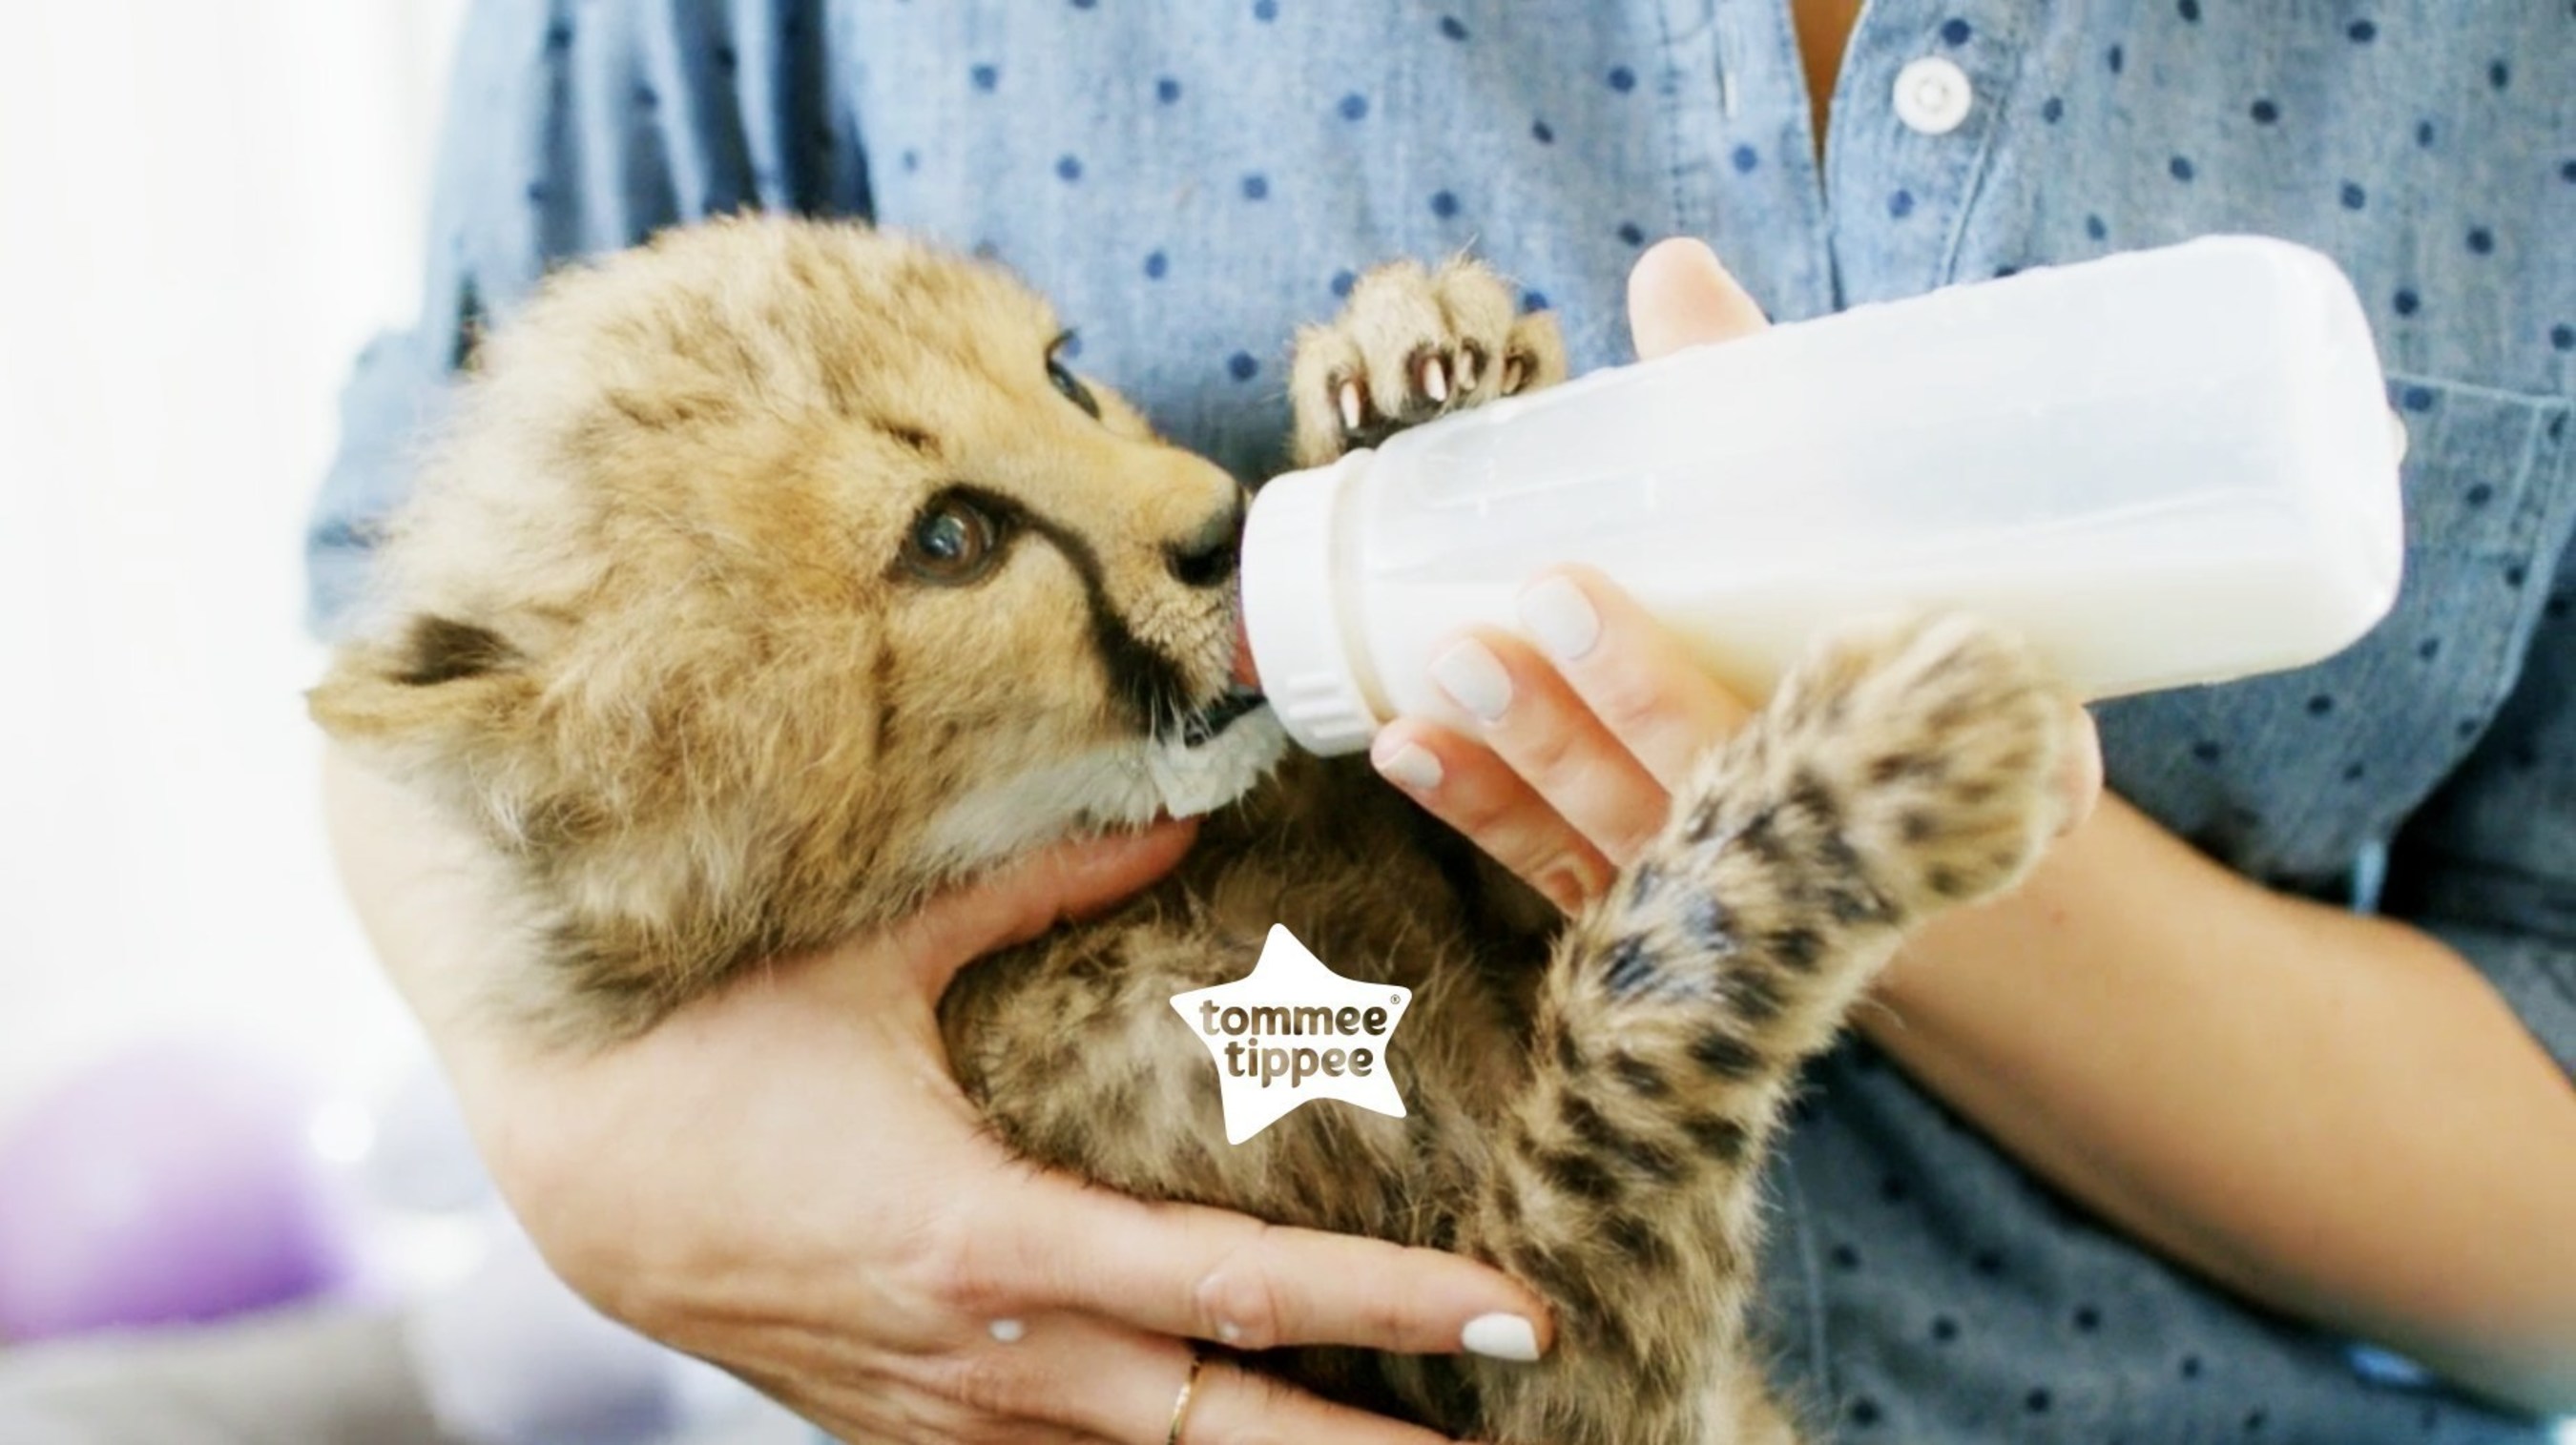 TOMMEE TIPPEE(R) HELPS PARENTS DONATE UNWANTED BABY BOTTLES TO ORPHANED NEWBORN ANIMALS